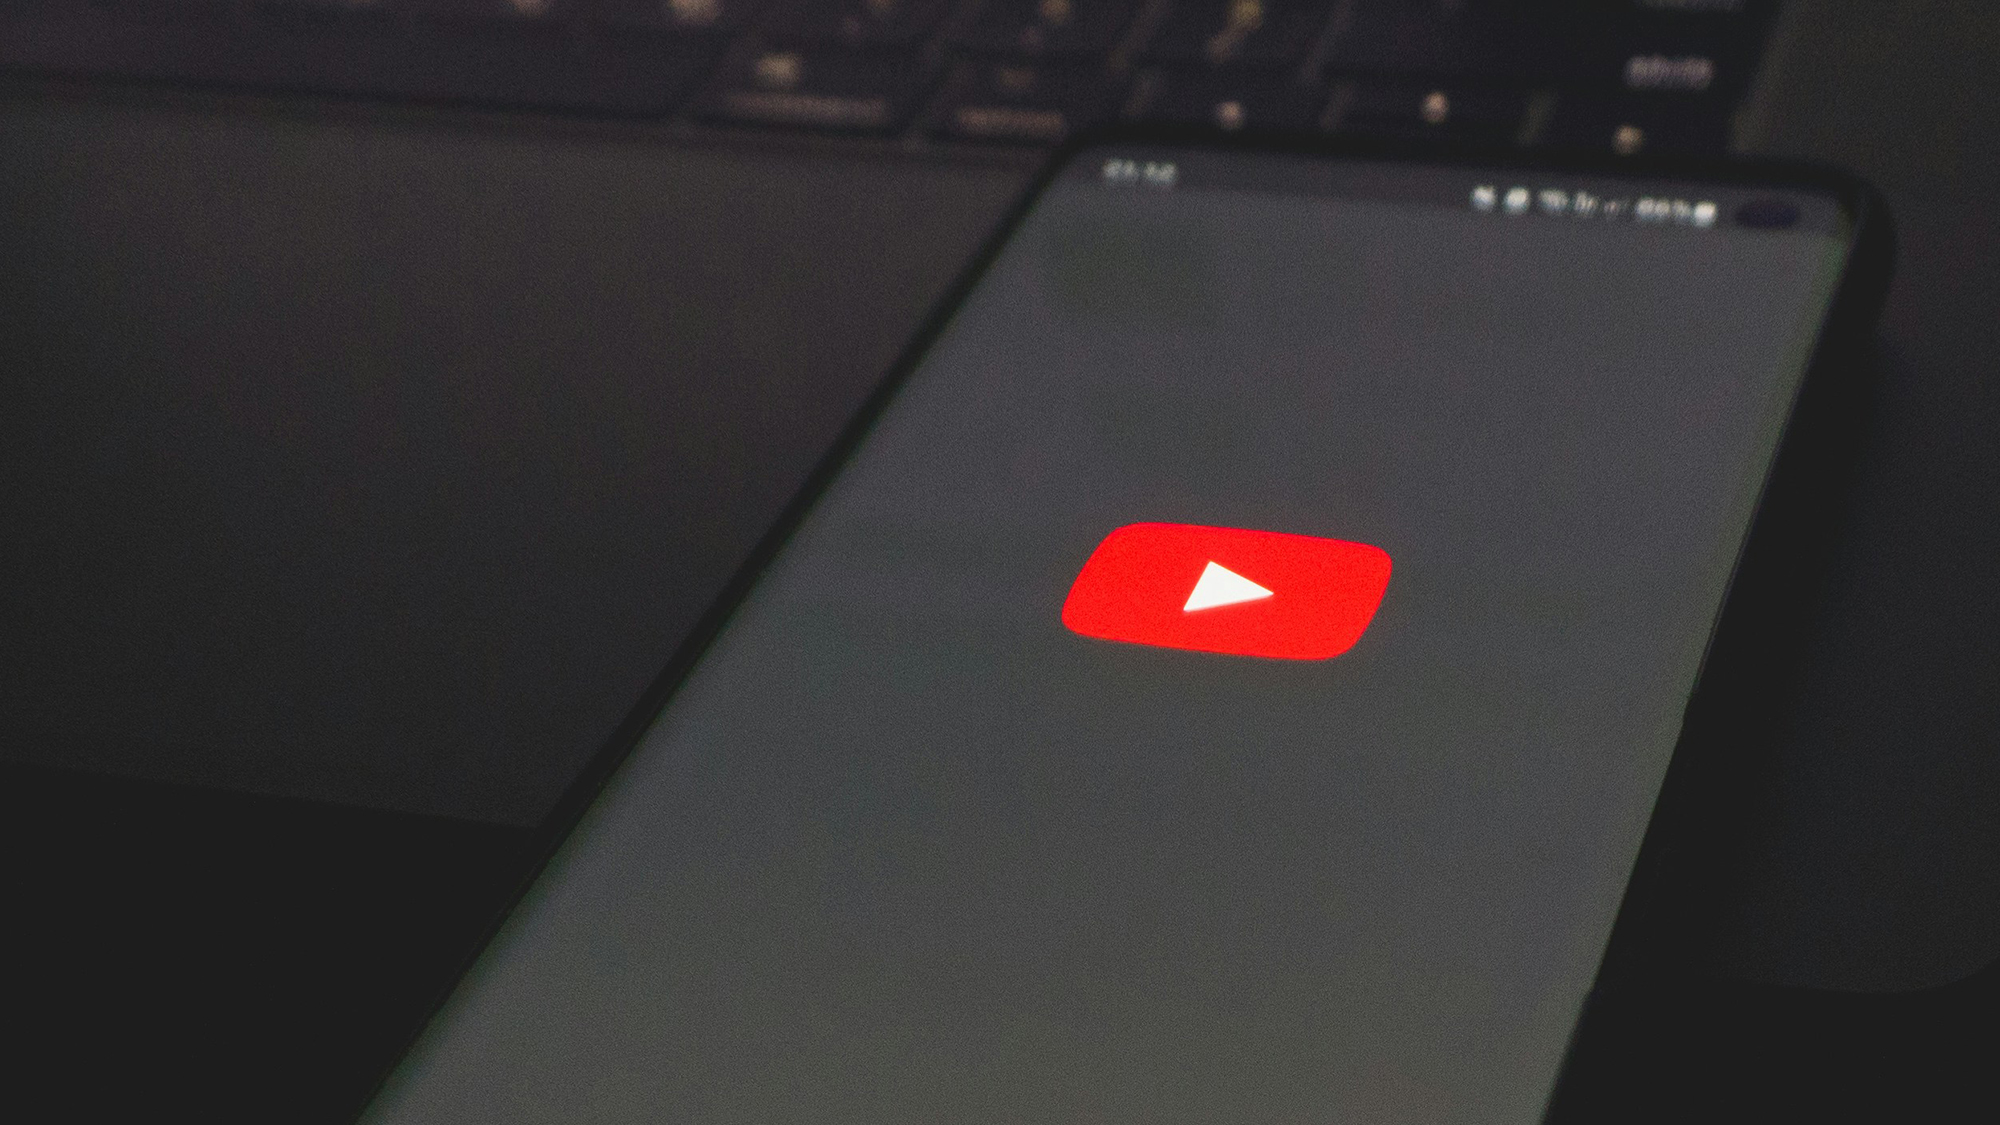 YouTube has a hidden ambient mode: Here’s how to turn it on (and off)